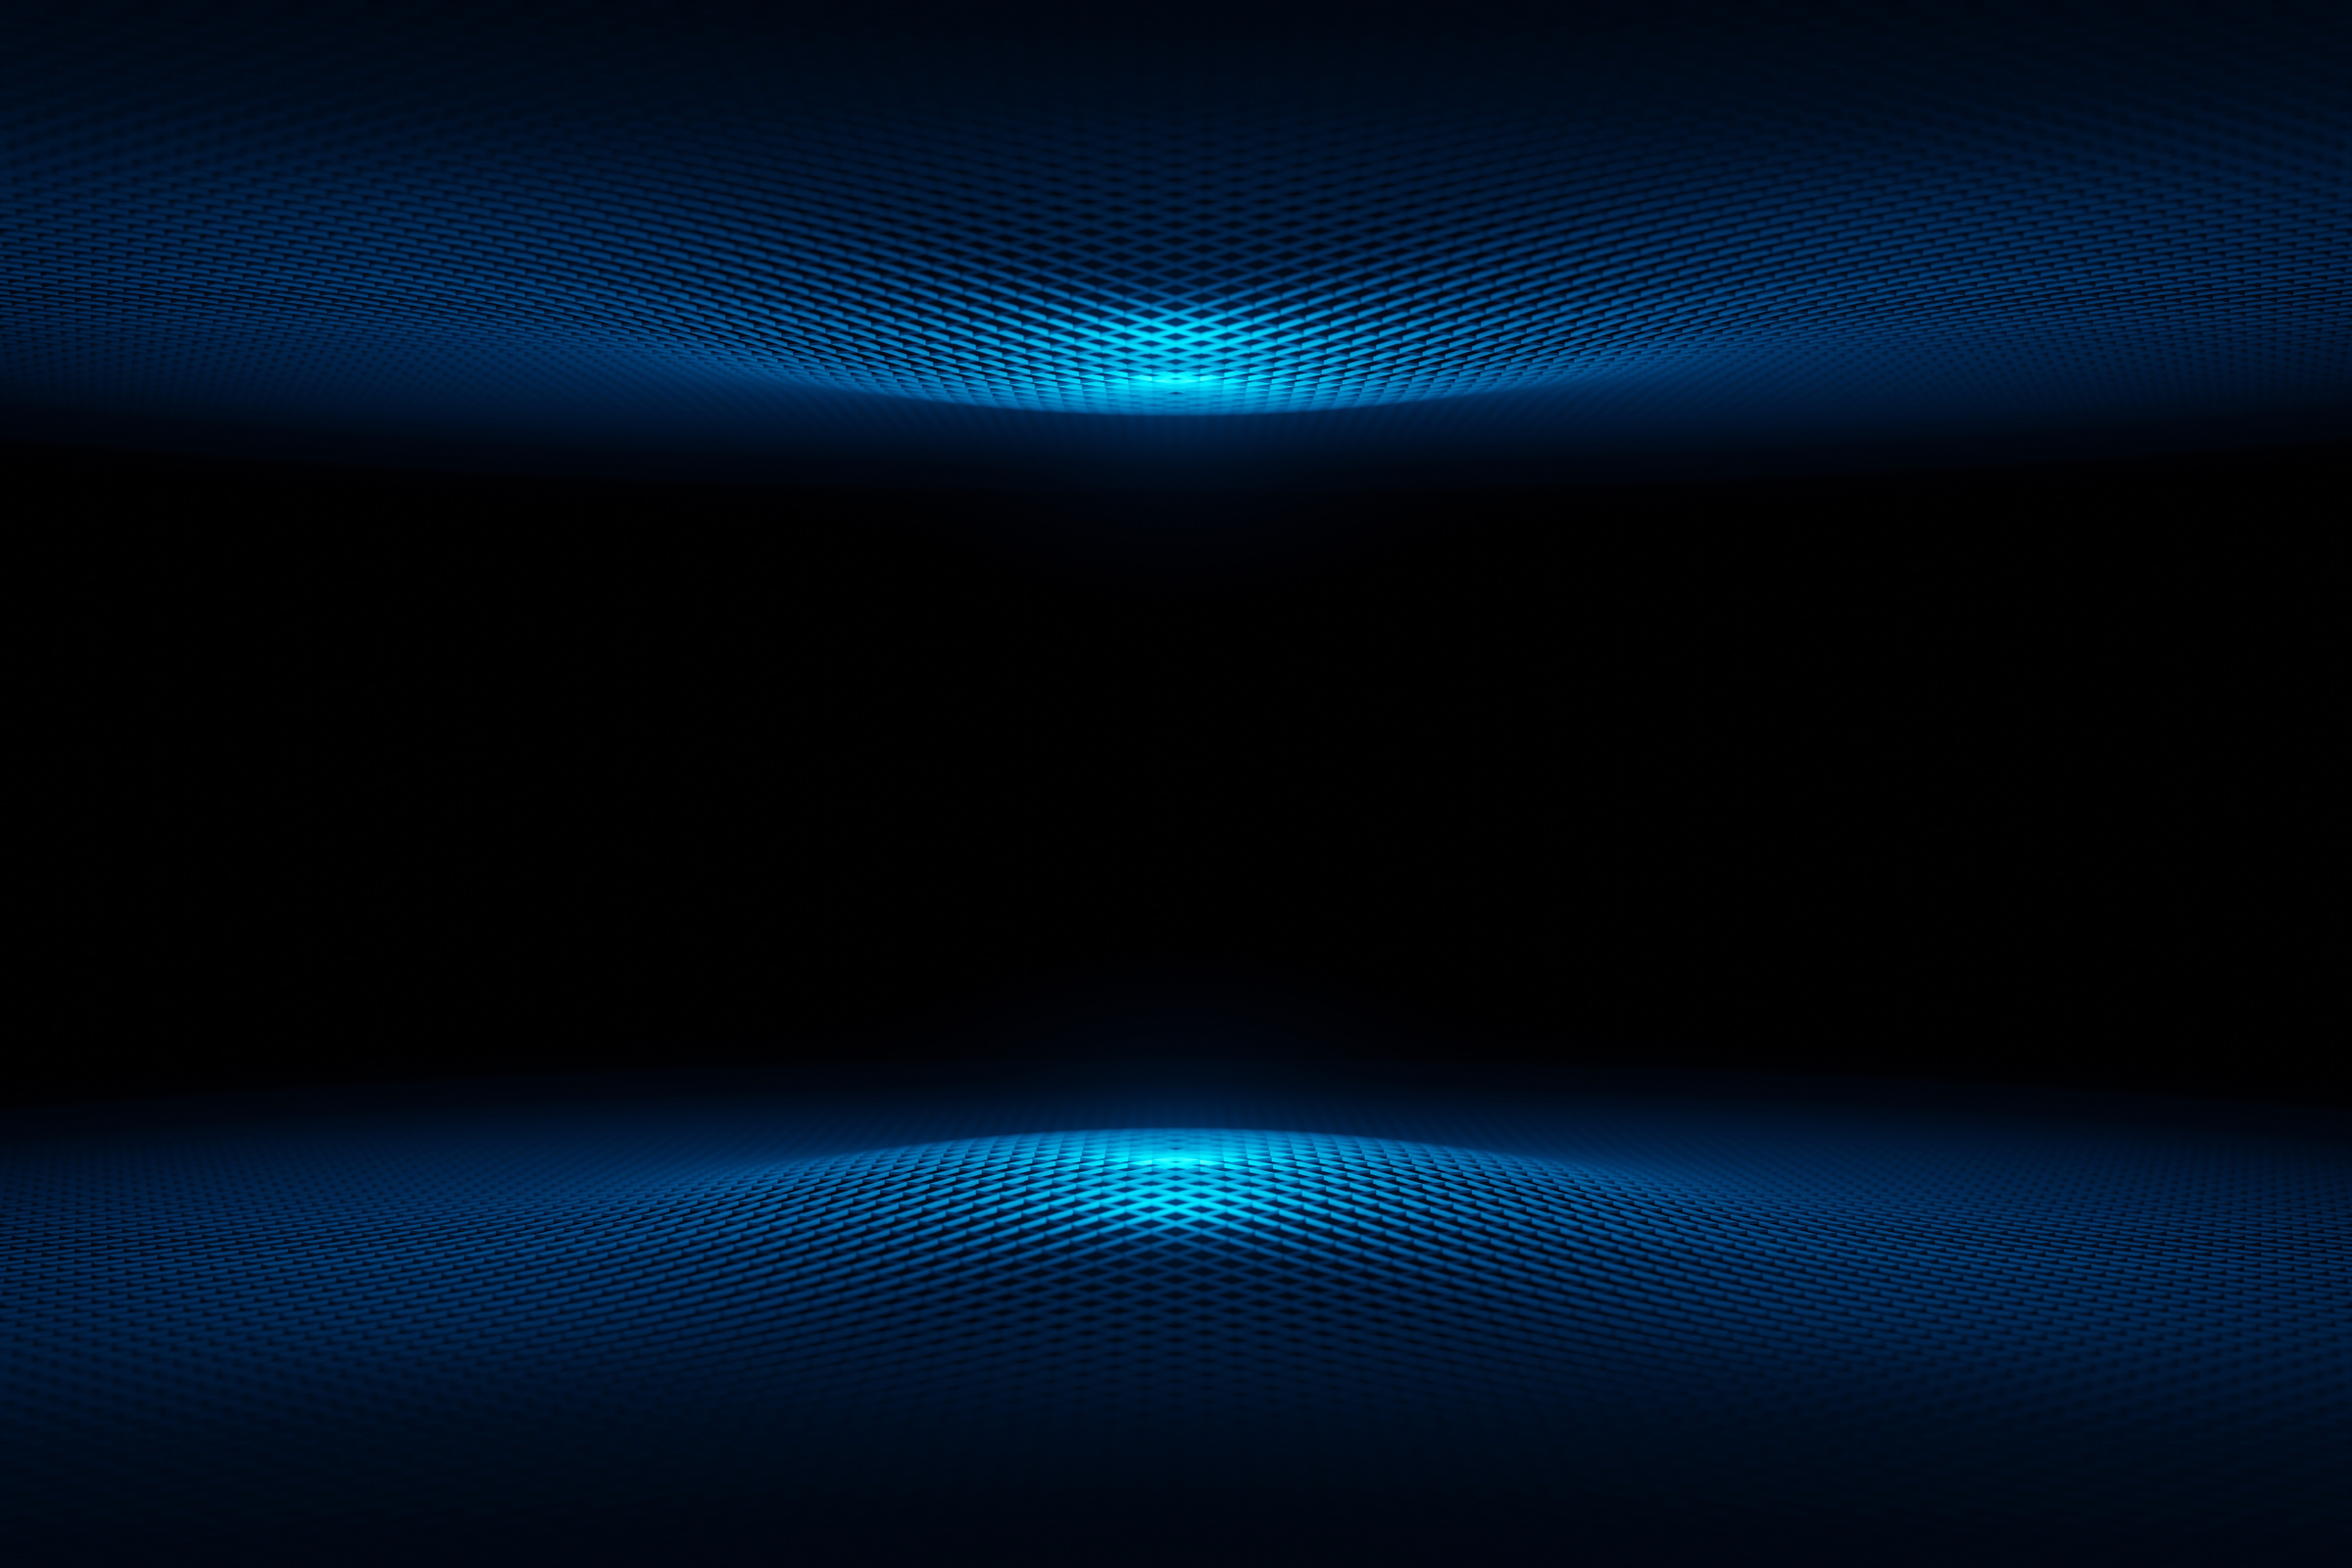 Abstract Futuristic Technology cyber space blue wave background 3d rendering